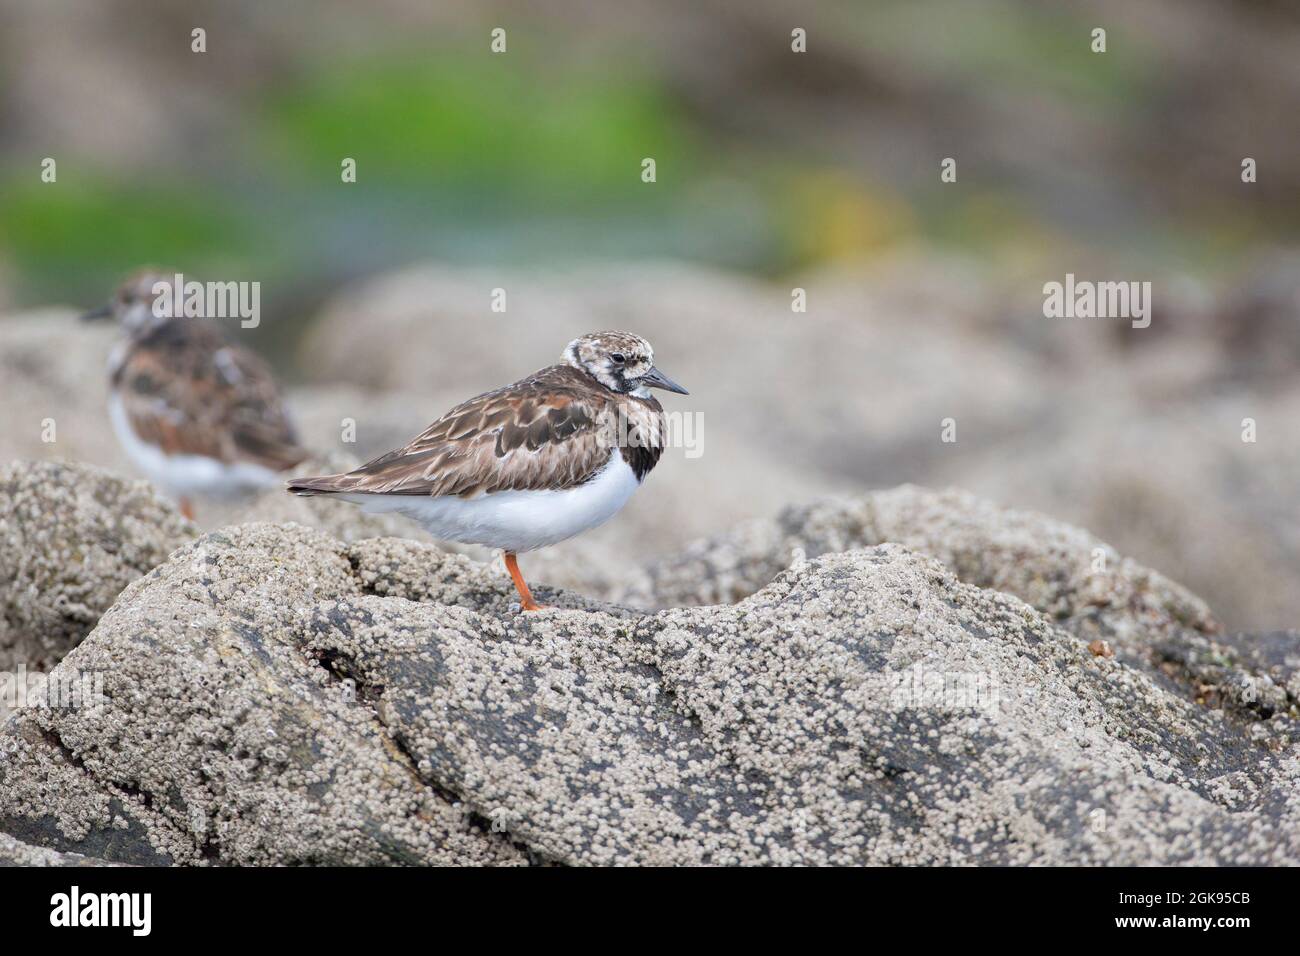 ruddy turnstone (Arenaria interpres), perched on a rock with barnacles, another one blurry in the back, France, Brittany Stock Photo